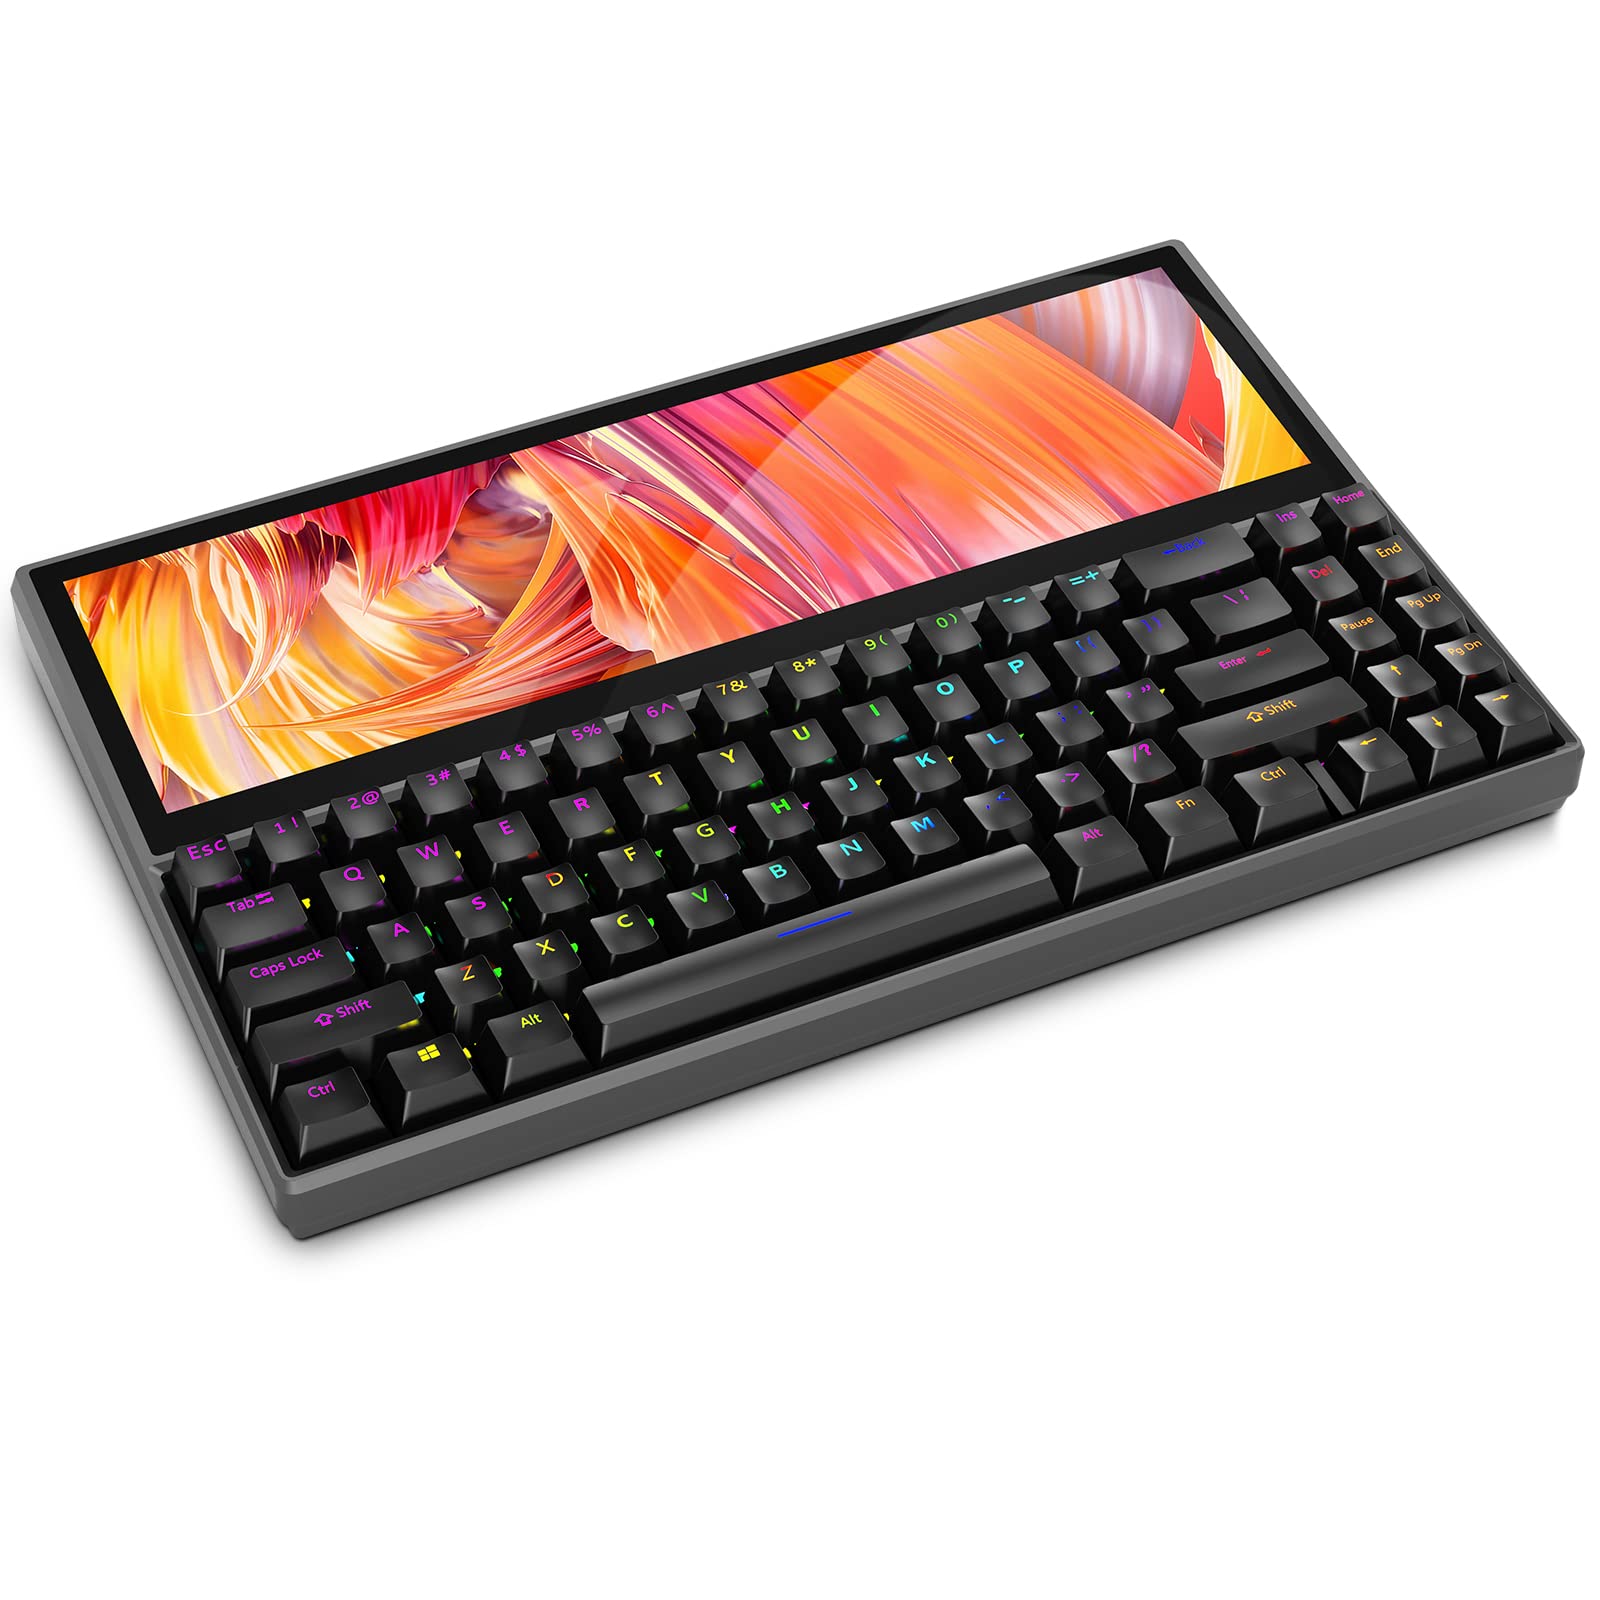 Kwumsy K2 USB Keyboard with 12.6-inch touchscreen